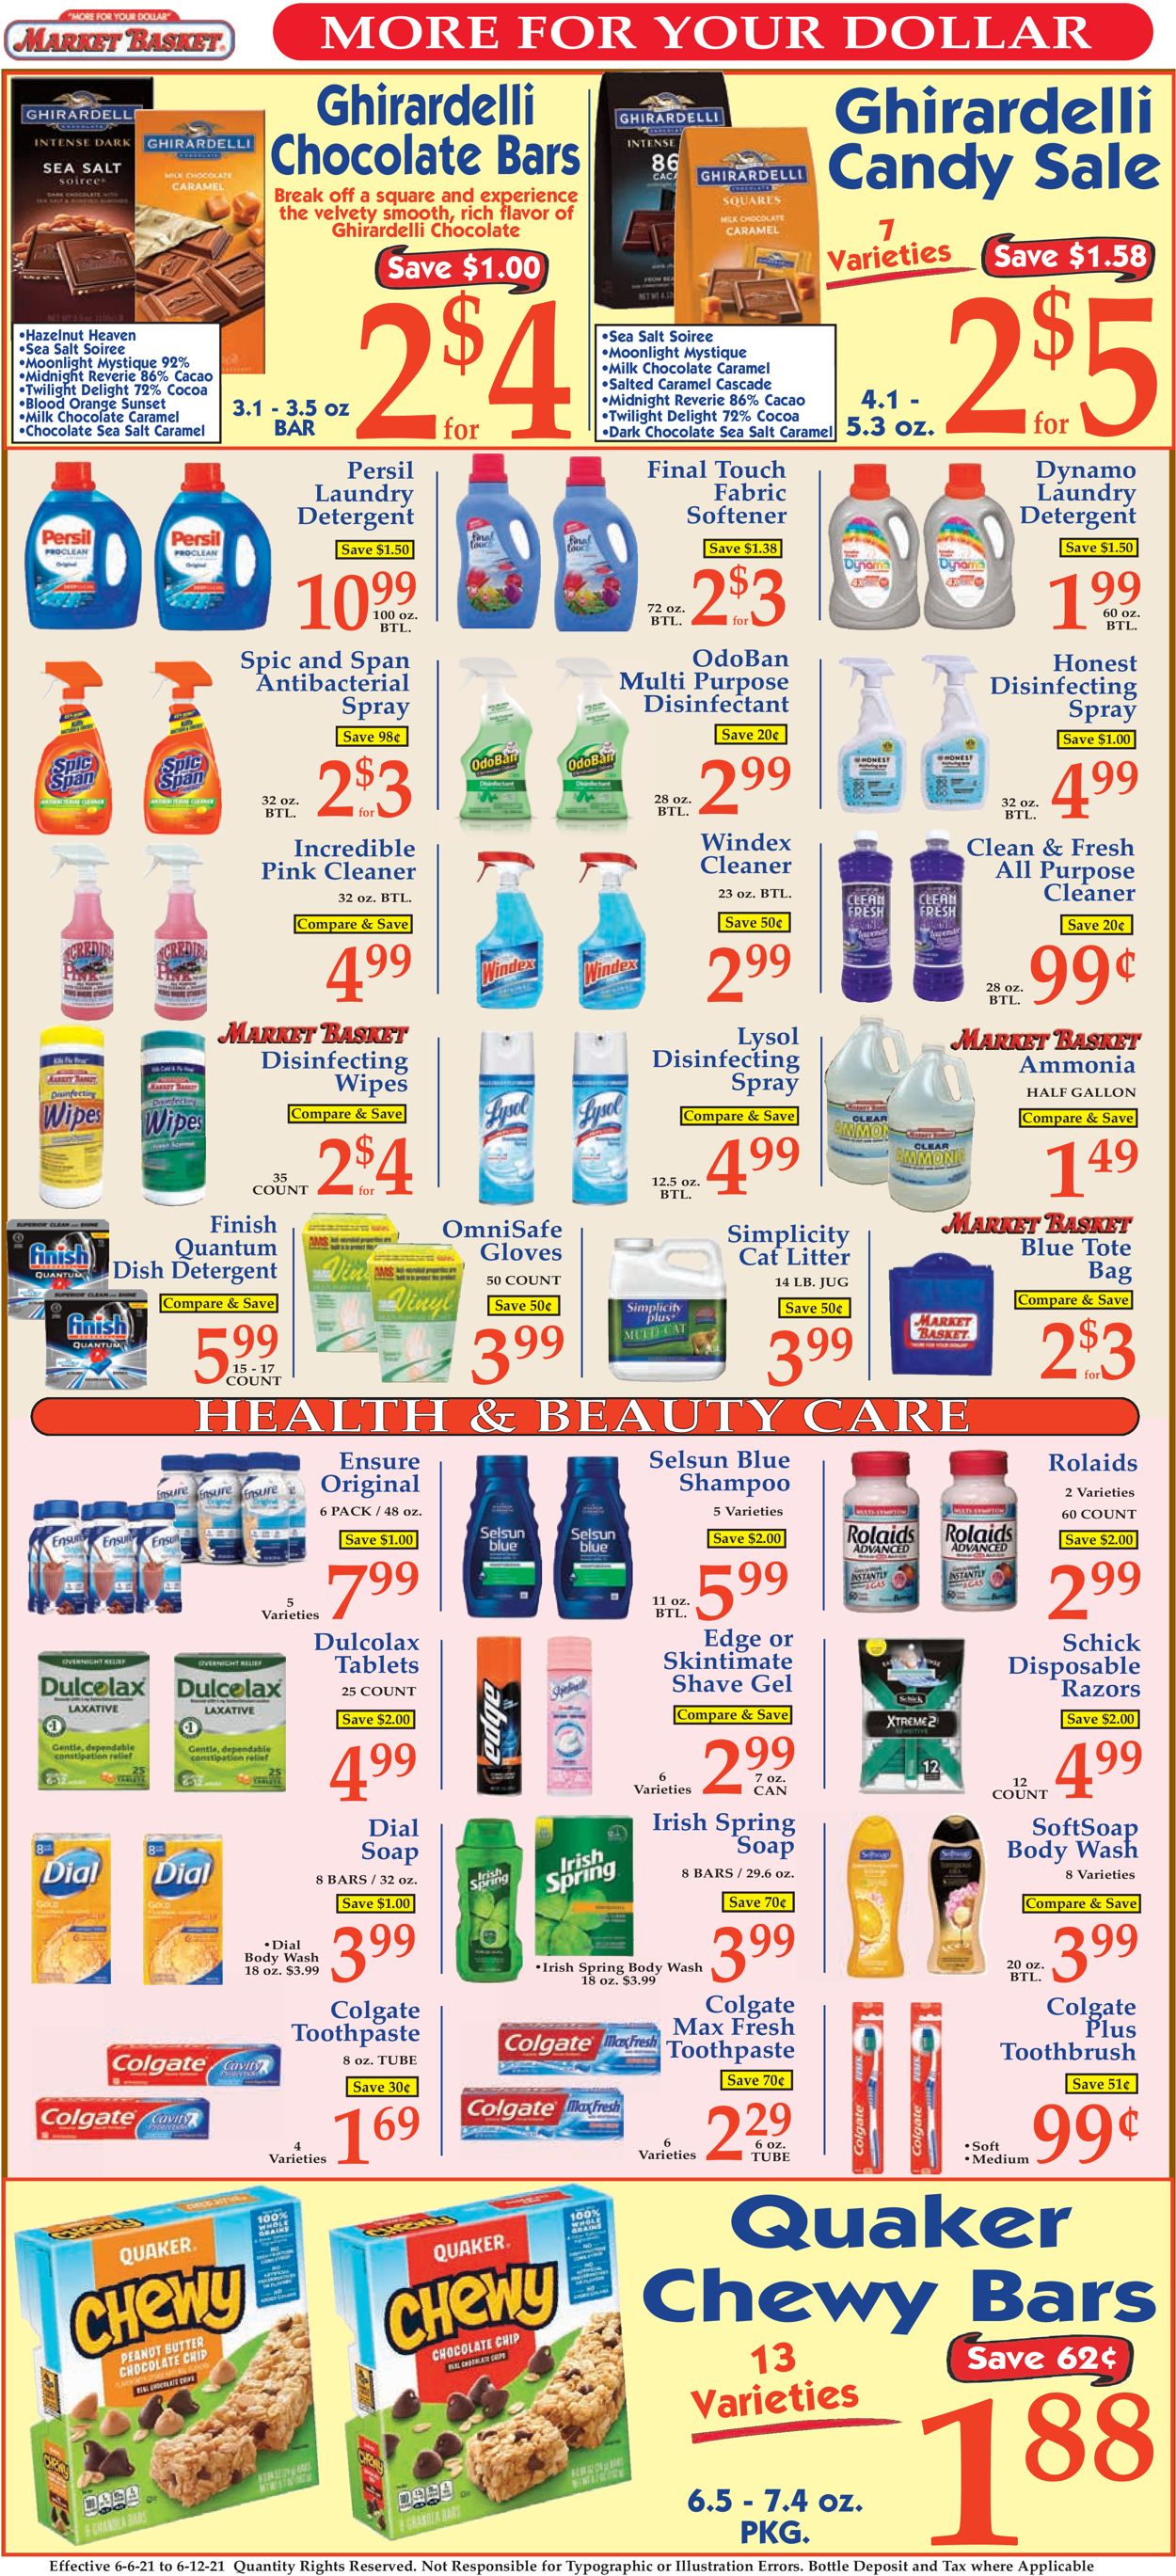 Market Basket Ad from 06/06/2021